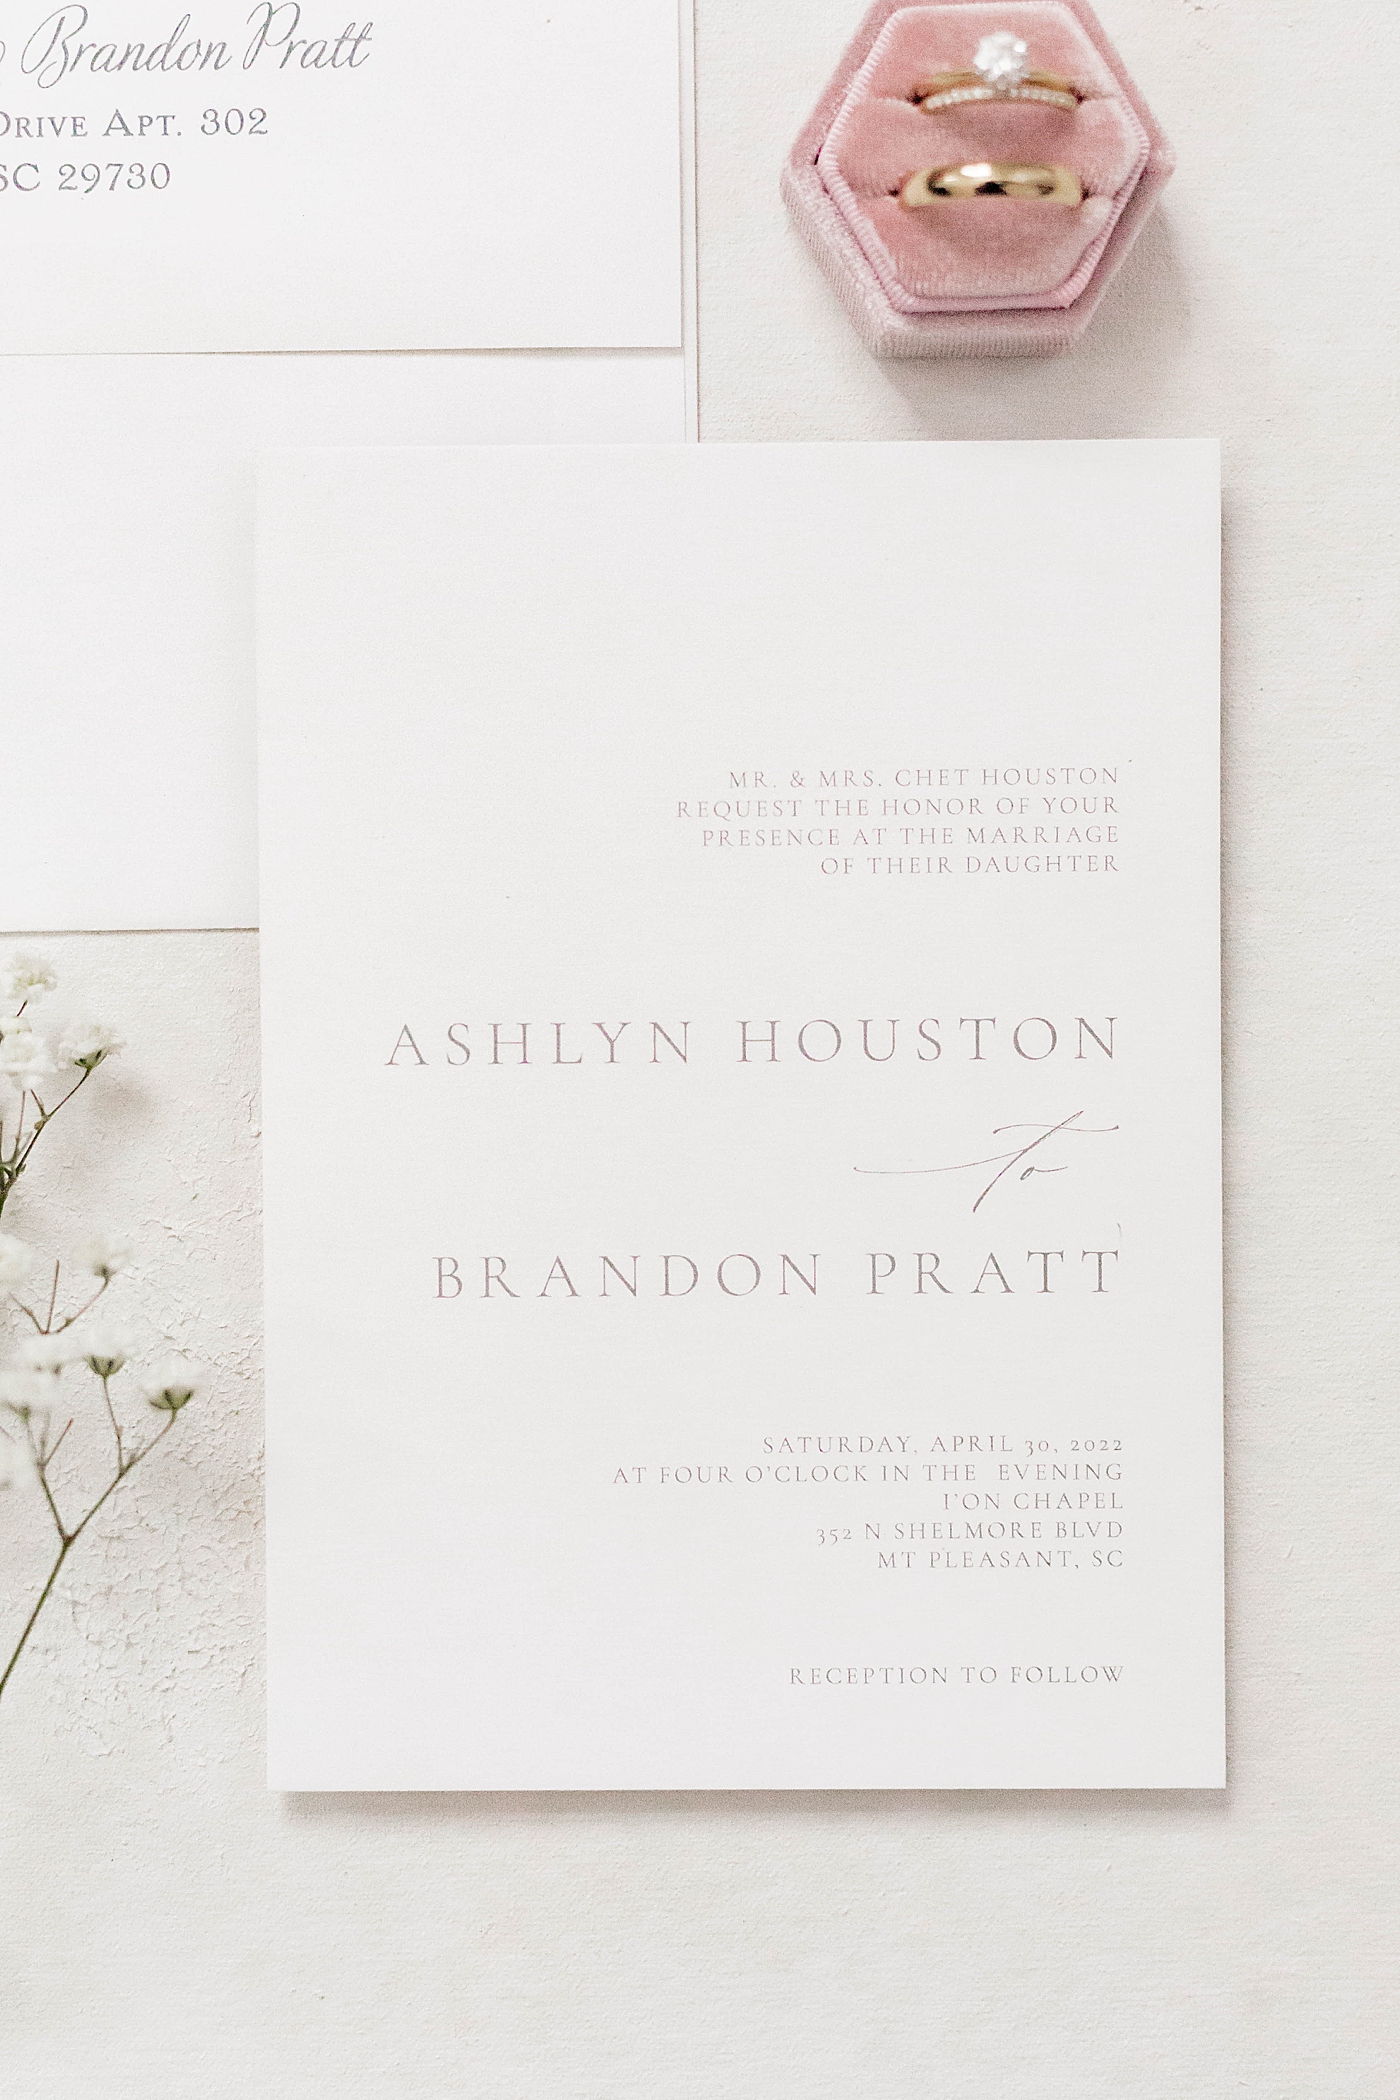 Wedding invitation with pink ring box | Carters Event Co